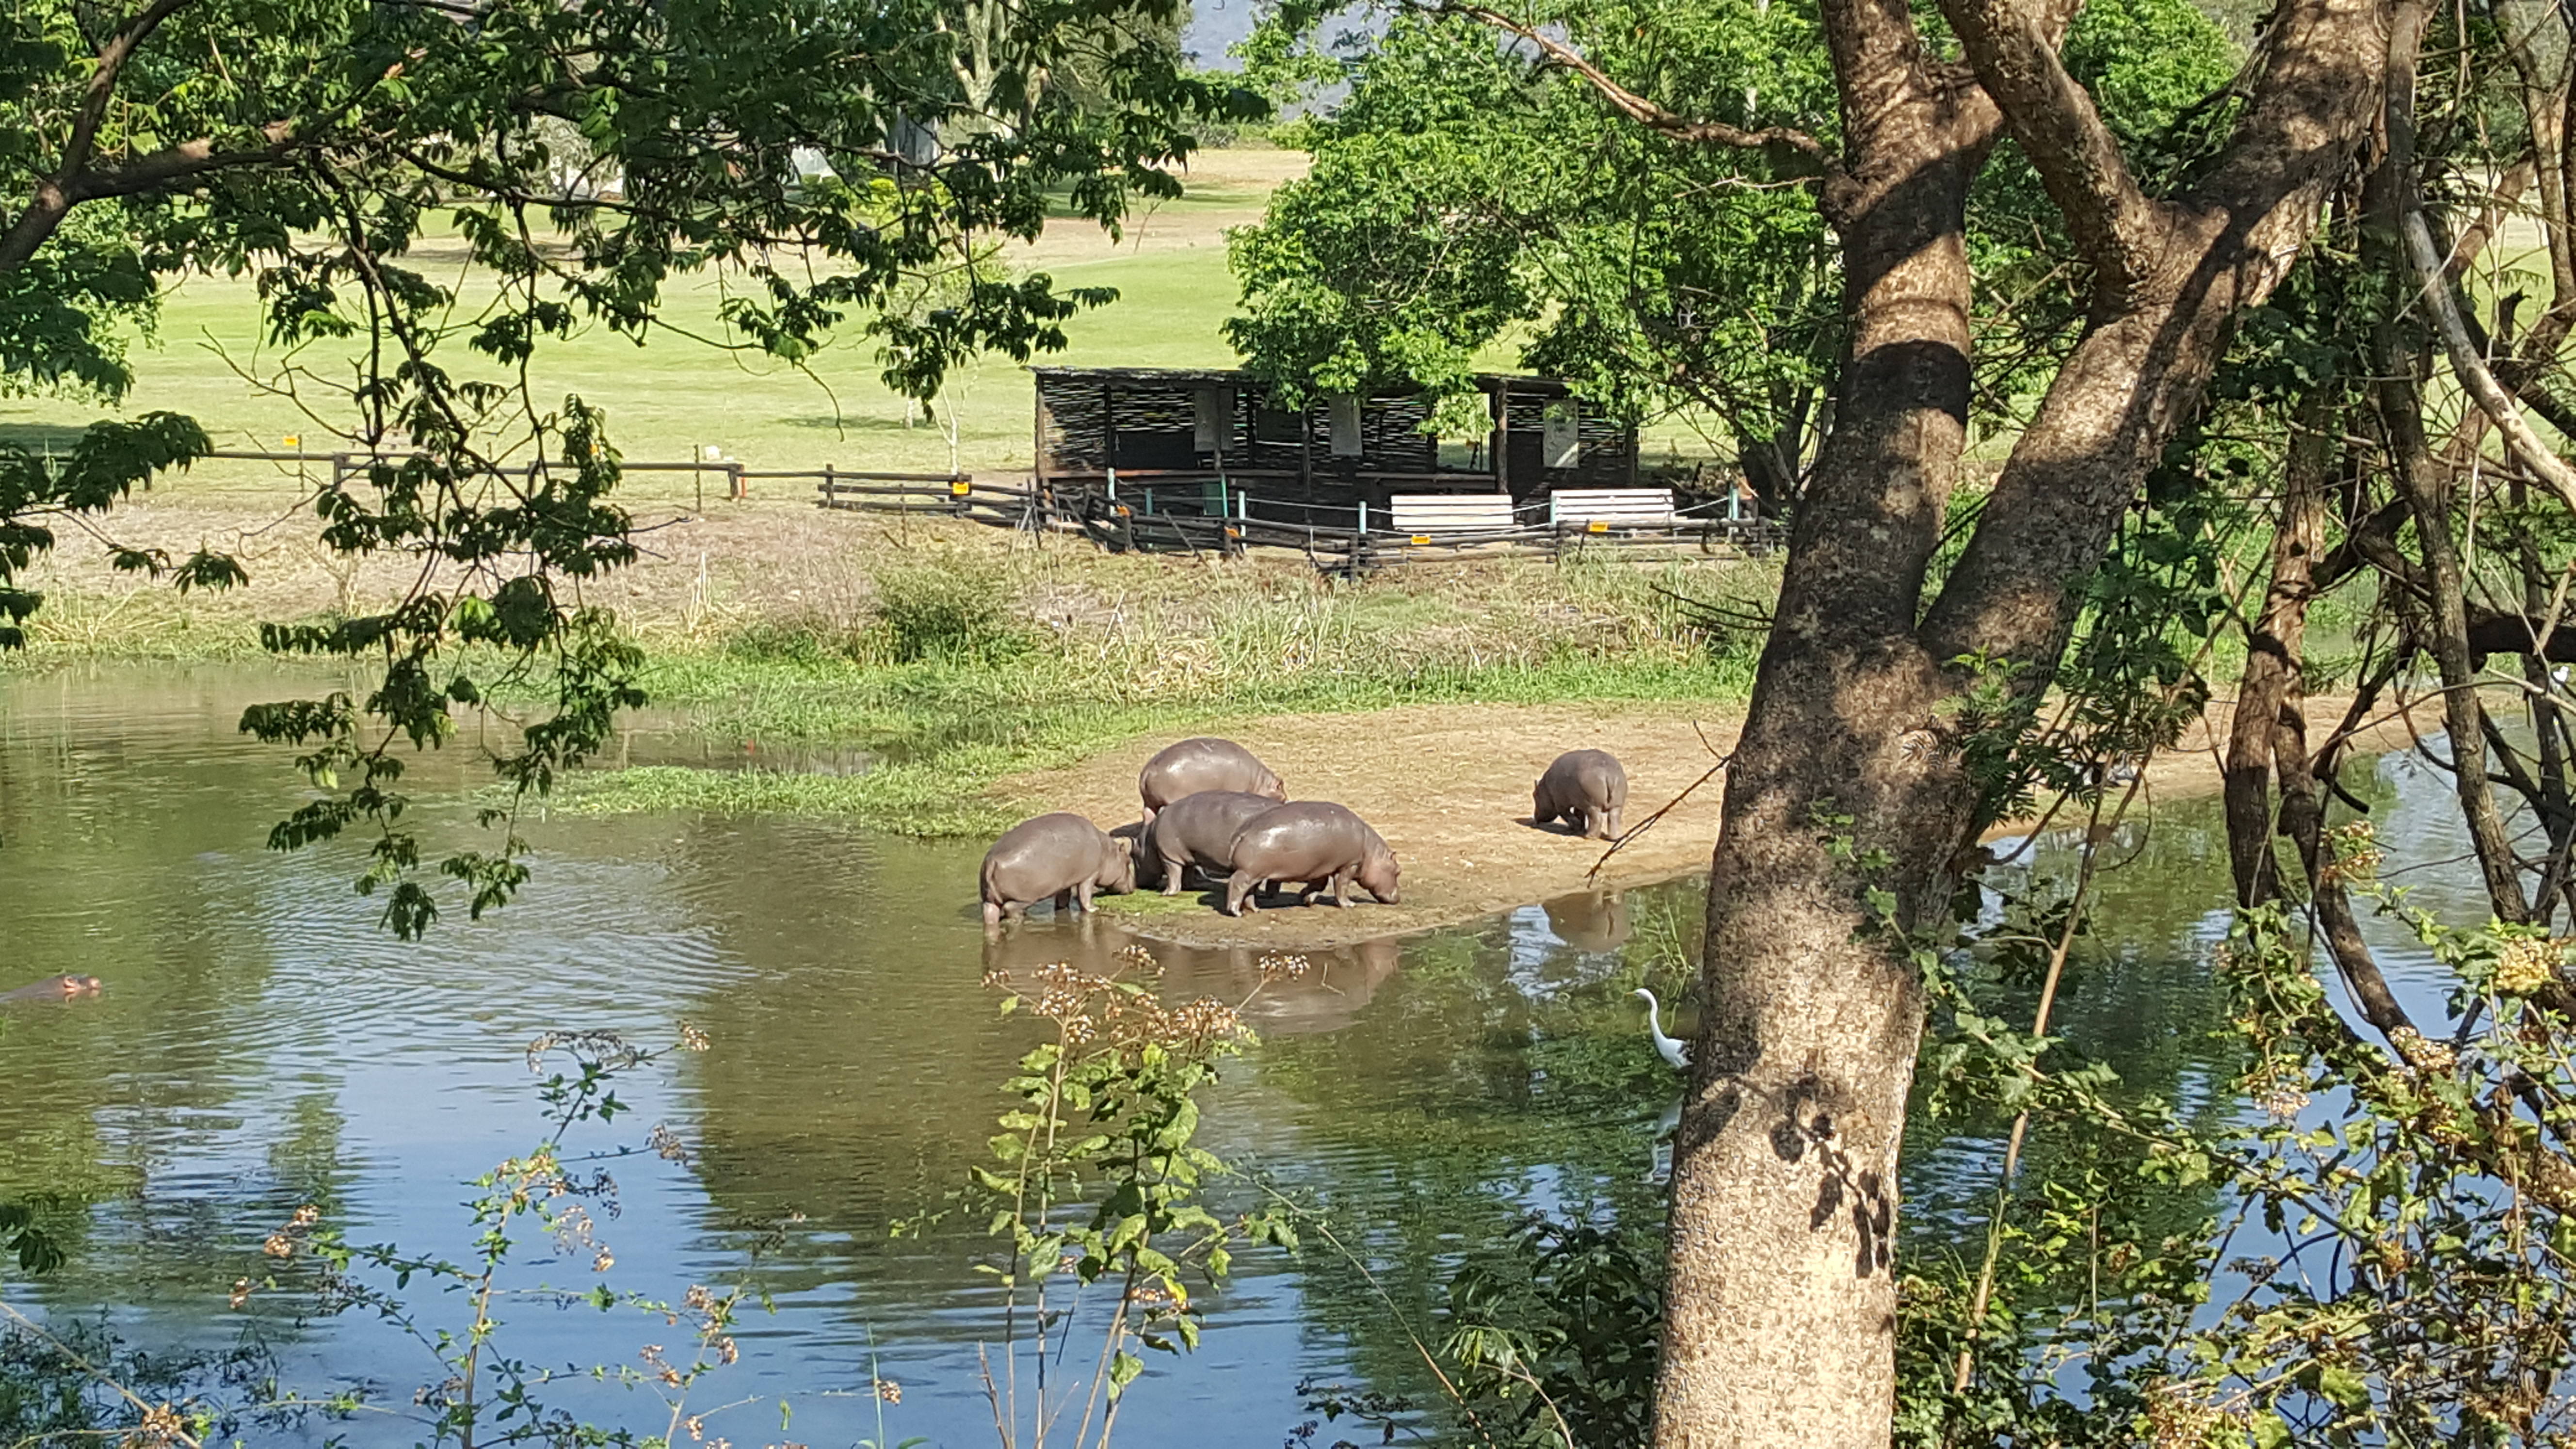 Just some of the two dozen (or more) hippos in the dam